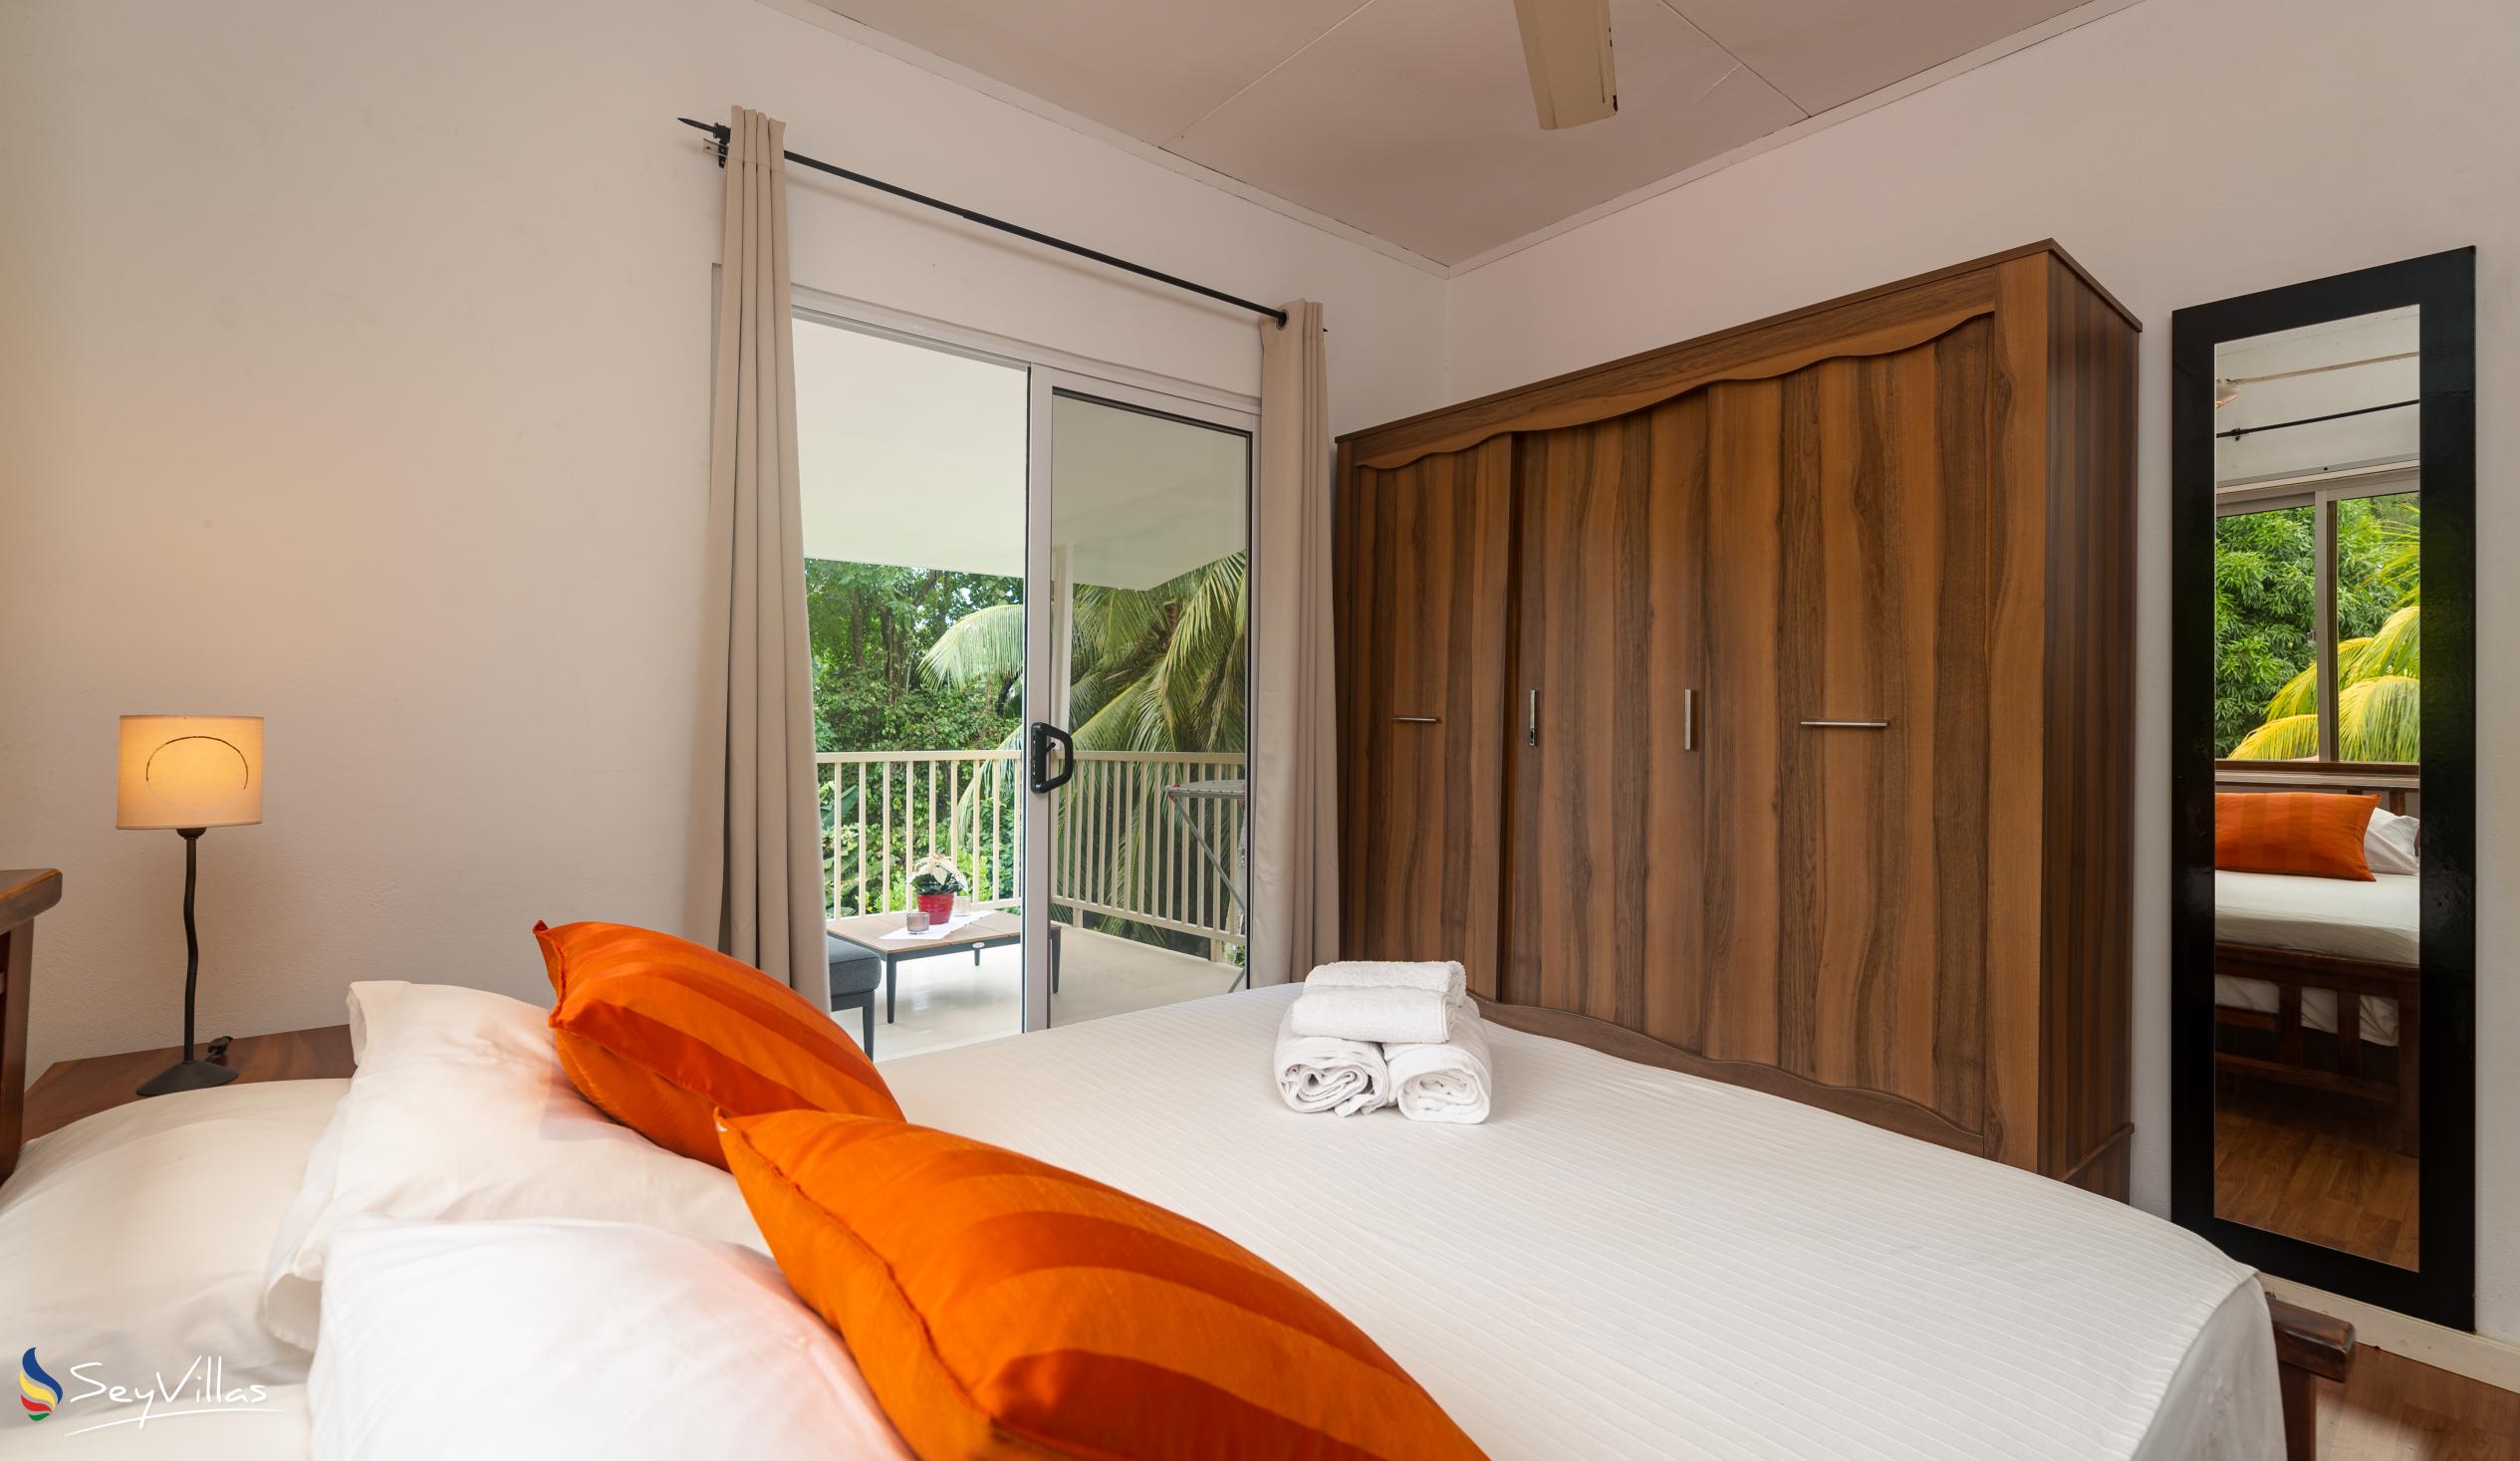 Foto 63: The Orchard Holiday Home - Chambre Queen - Mahé (Seychelles)